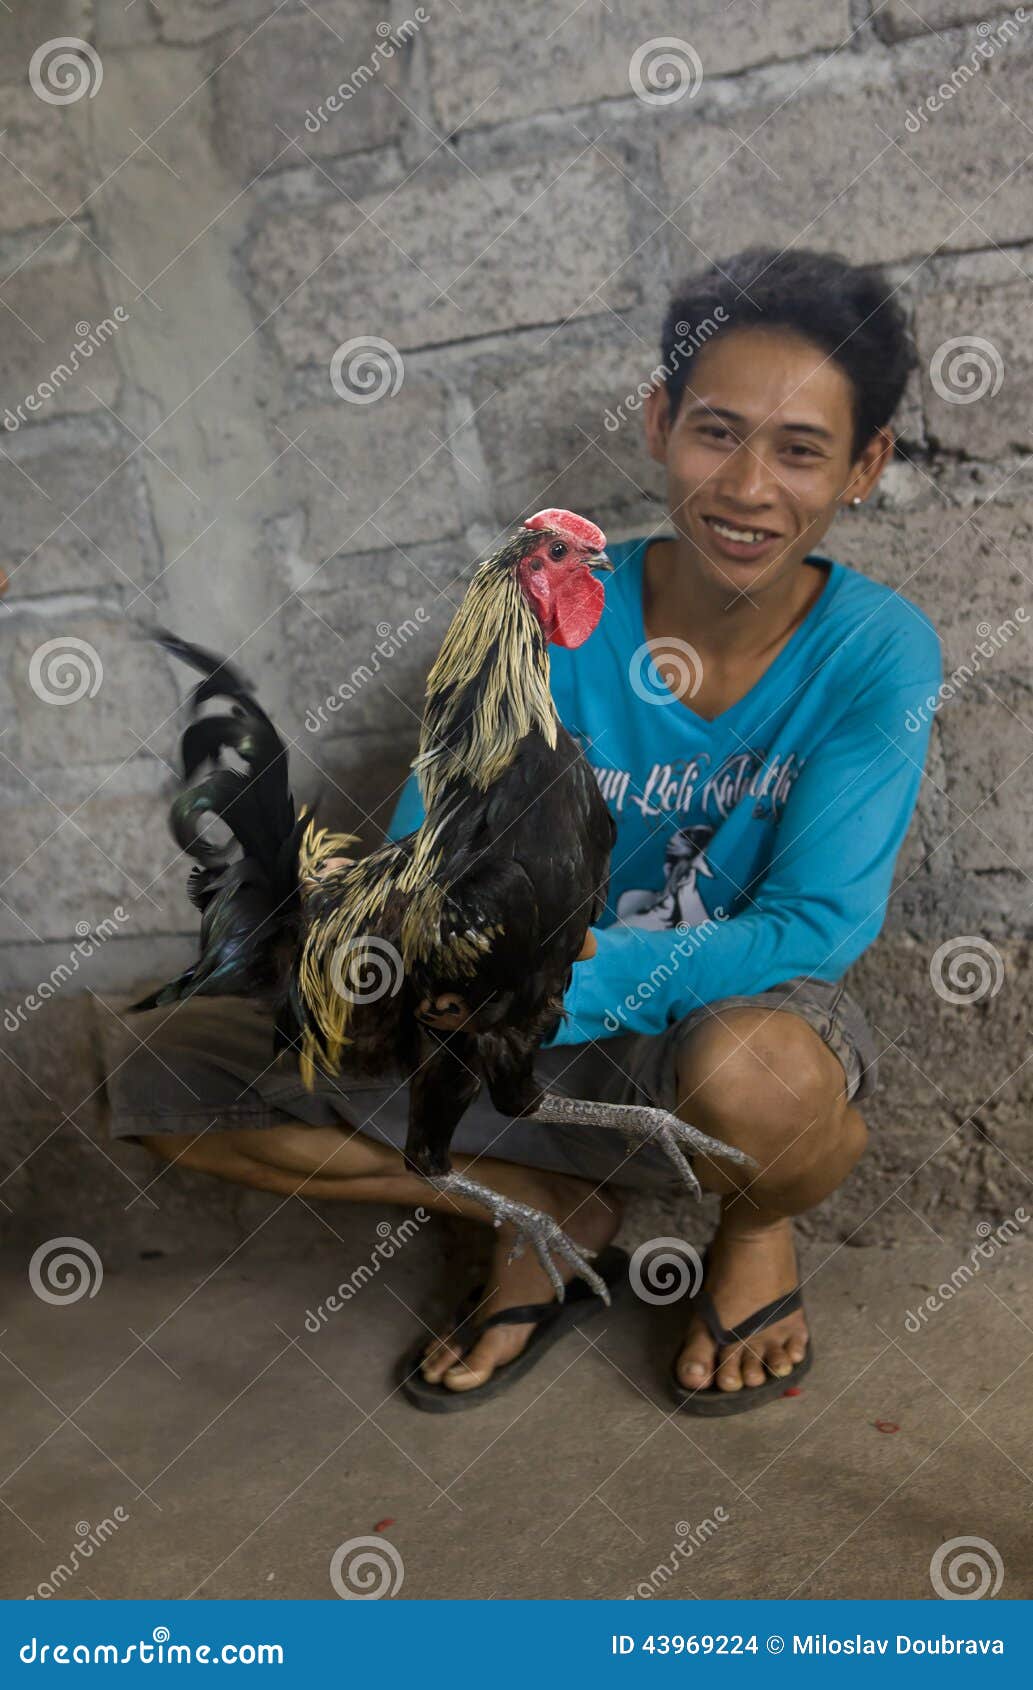 cock-fighter-his-owner-young-squatting-indonesian-boy-blue-t-shirt-bali-43969224.jpg